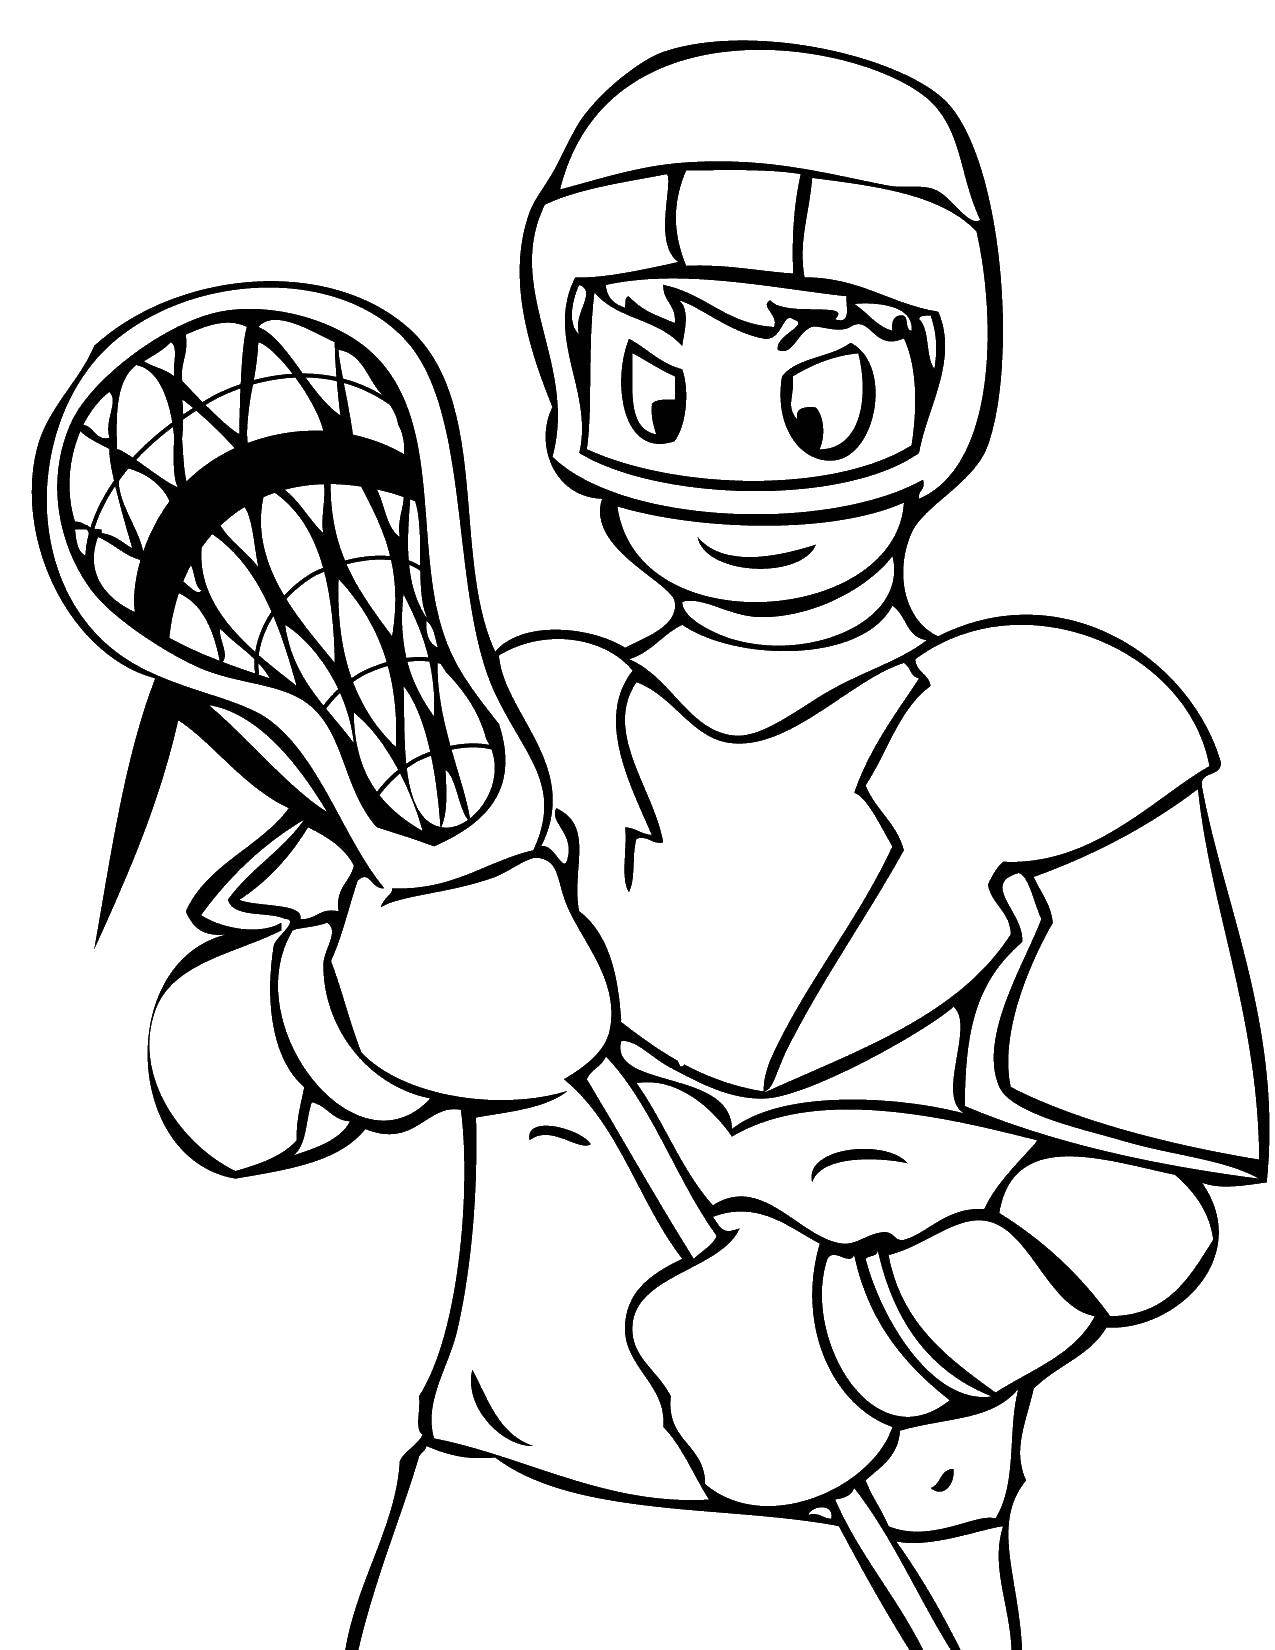 Coloring Athlete. Category Sports. Tags:  Sports.